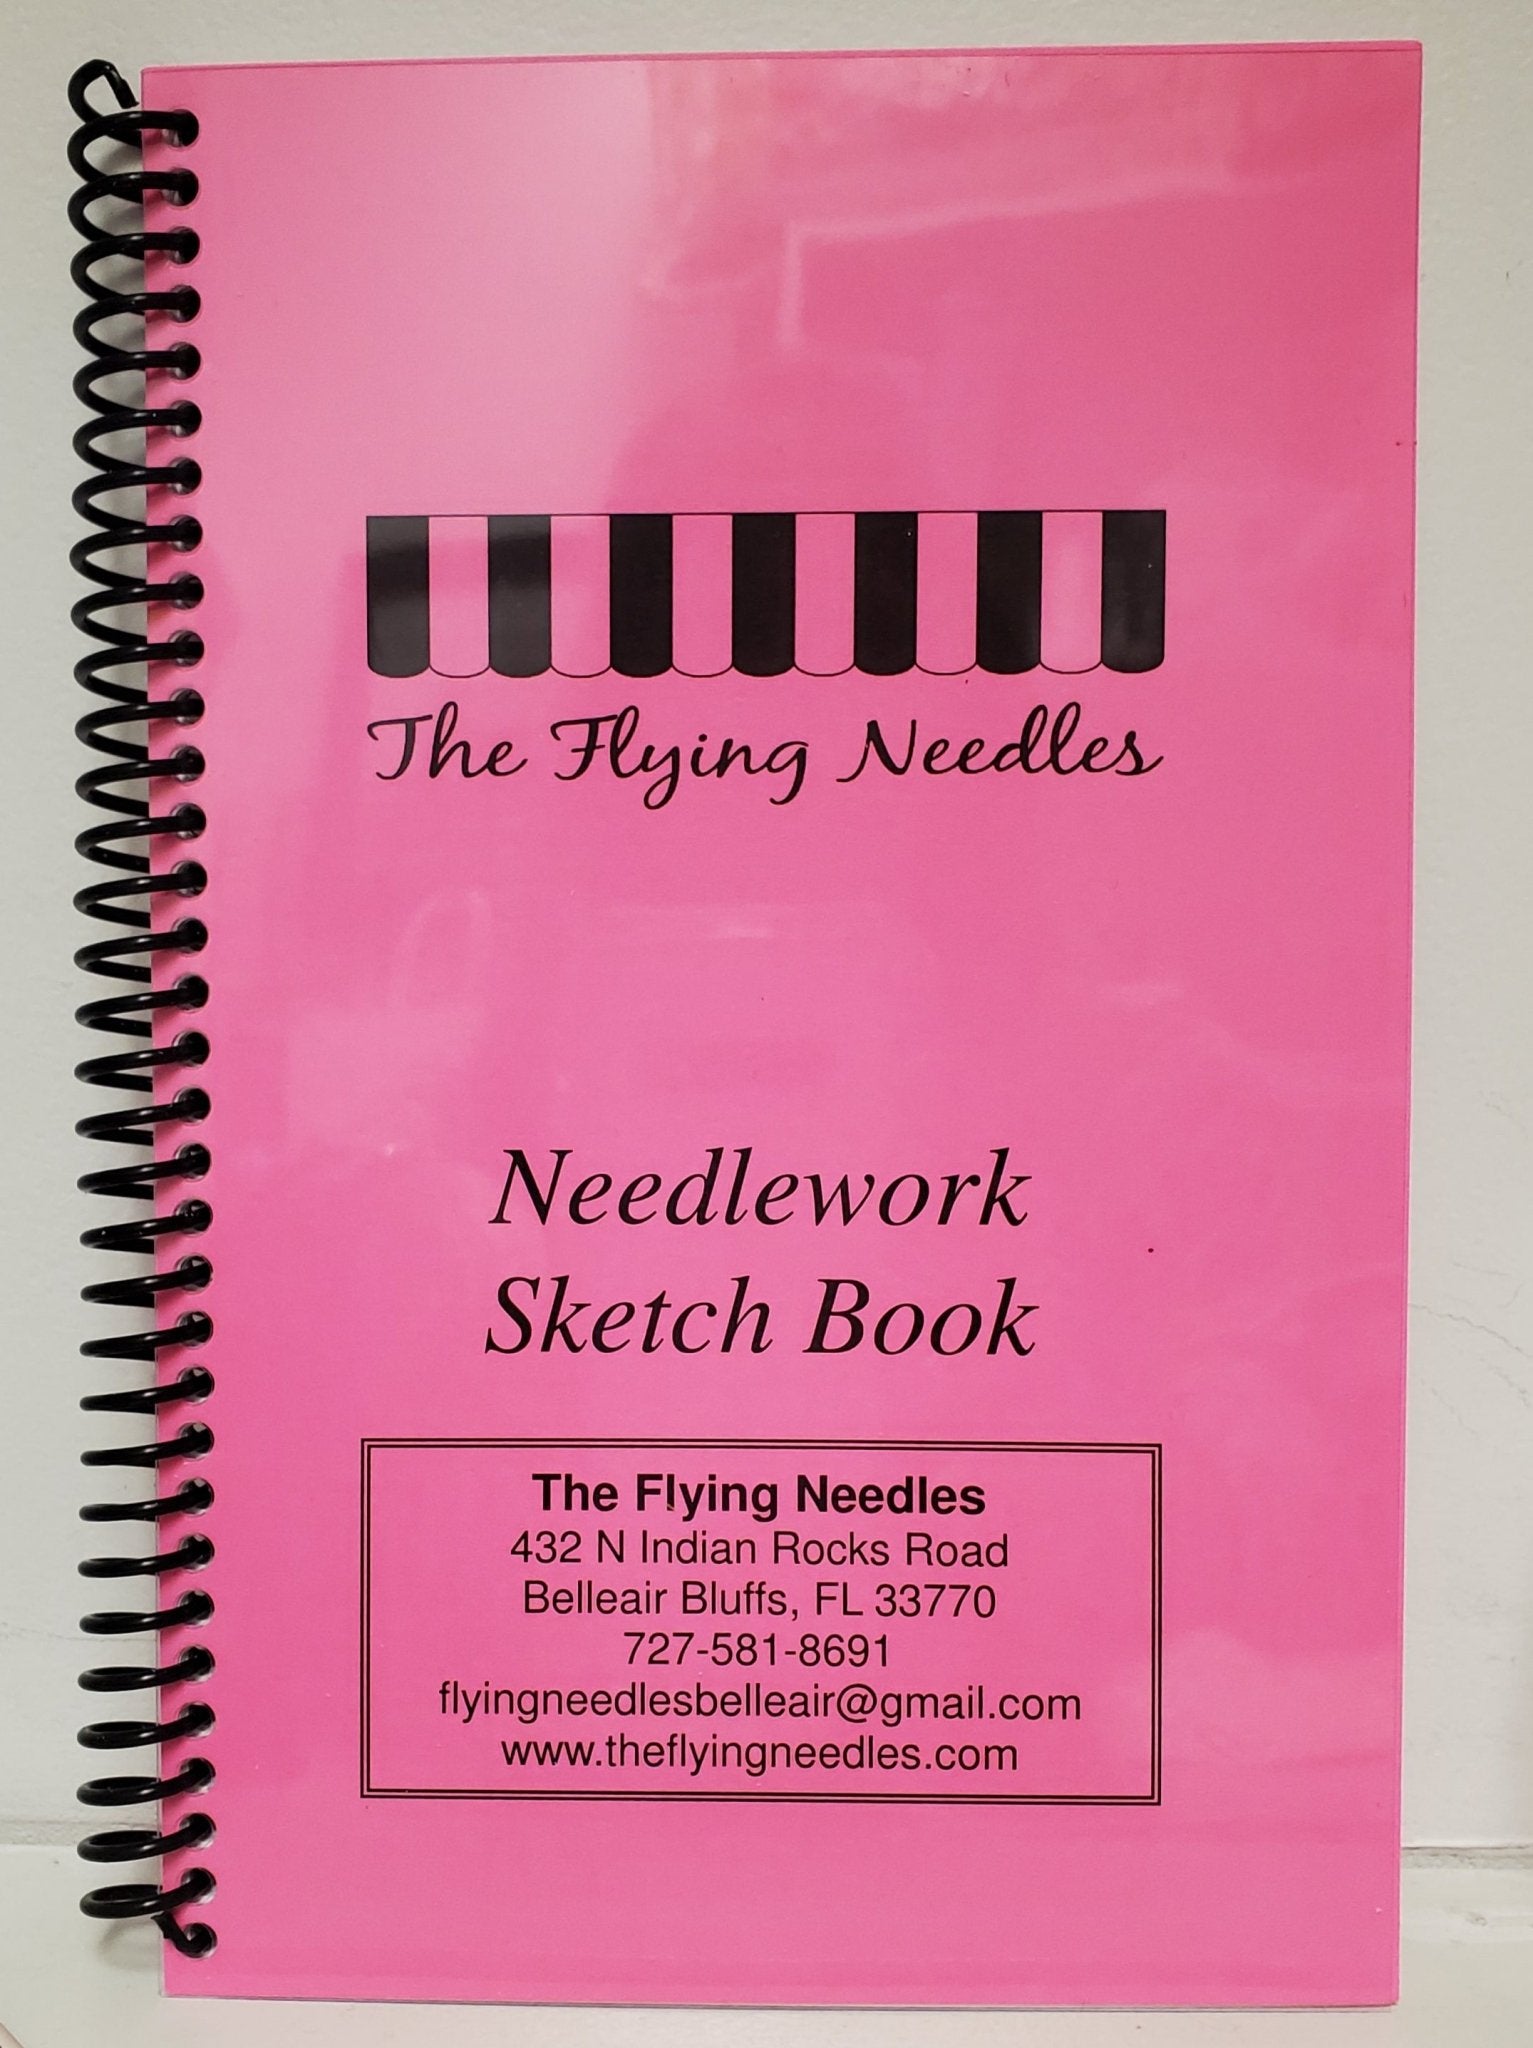 Sketch Book - The Flying Needles